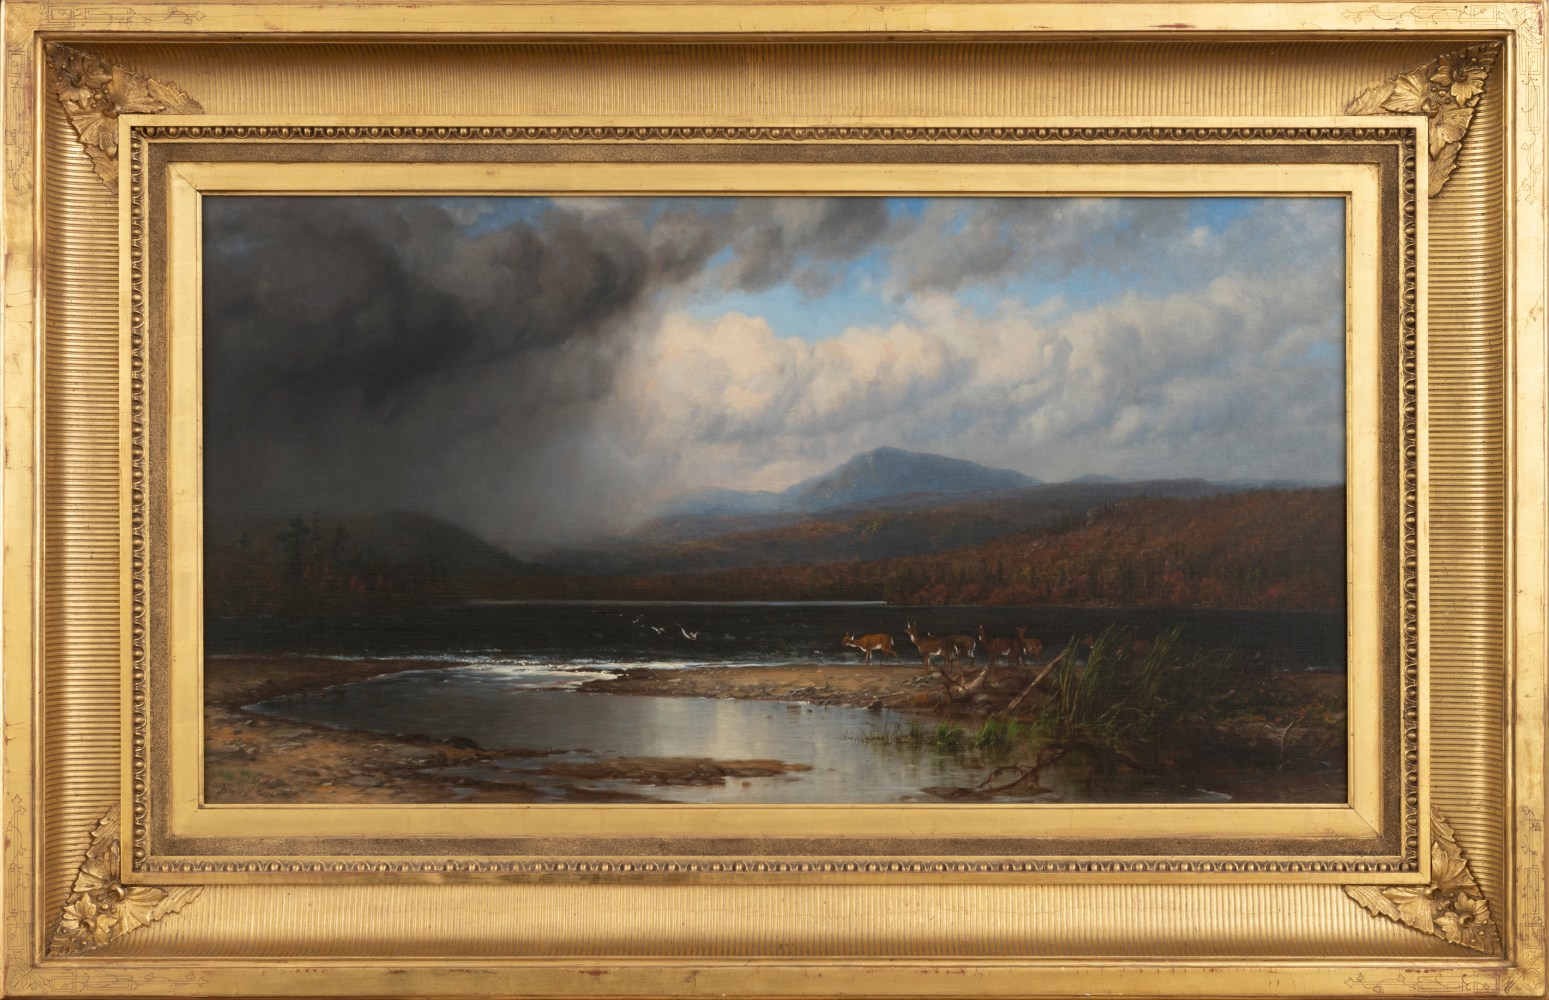 James M. Hart (1828–1901). Approaching Storm, Adirondacks, 1866. Oil on canvas, 24 x 46 in., signed and dated lower left: James M. Hart 1866 (framed)